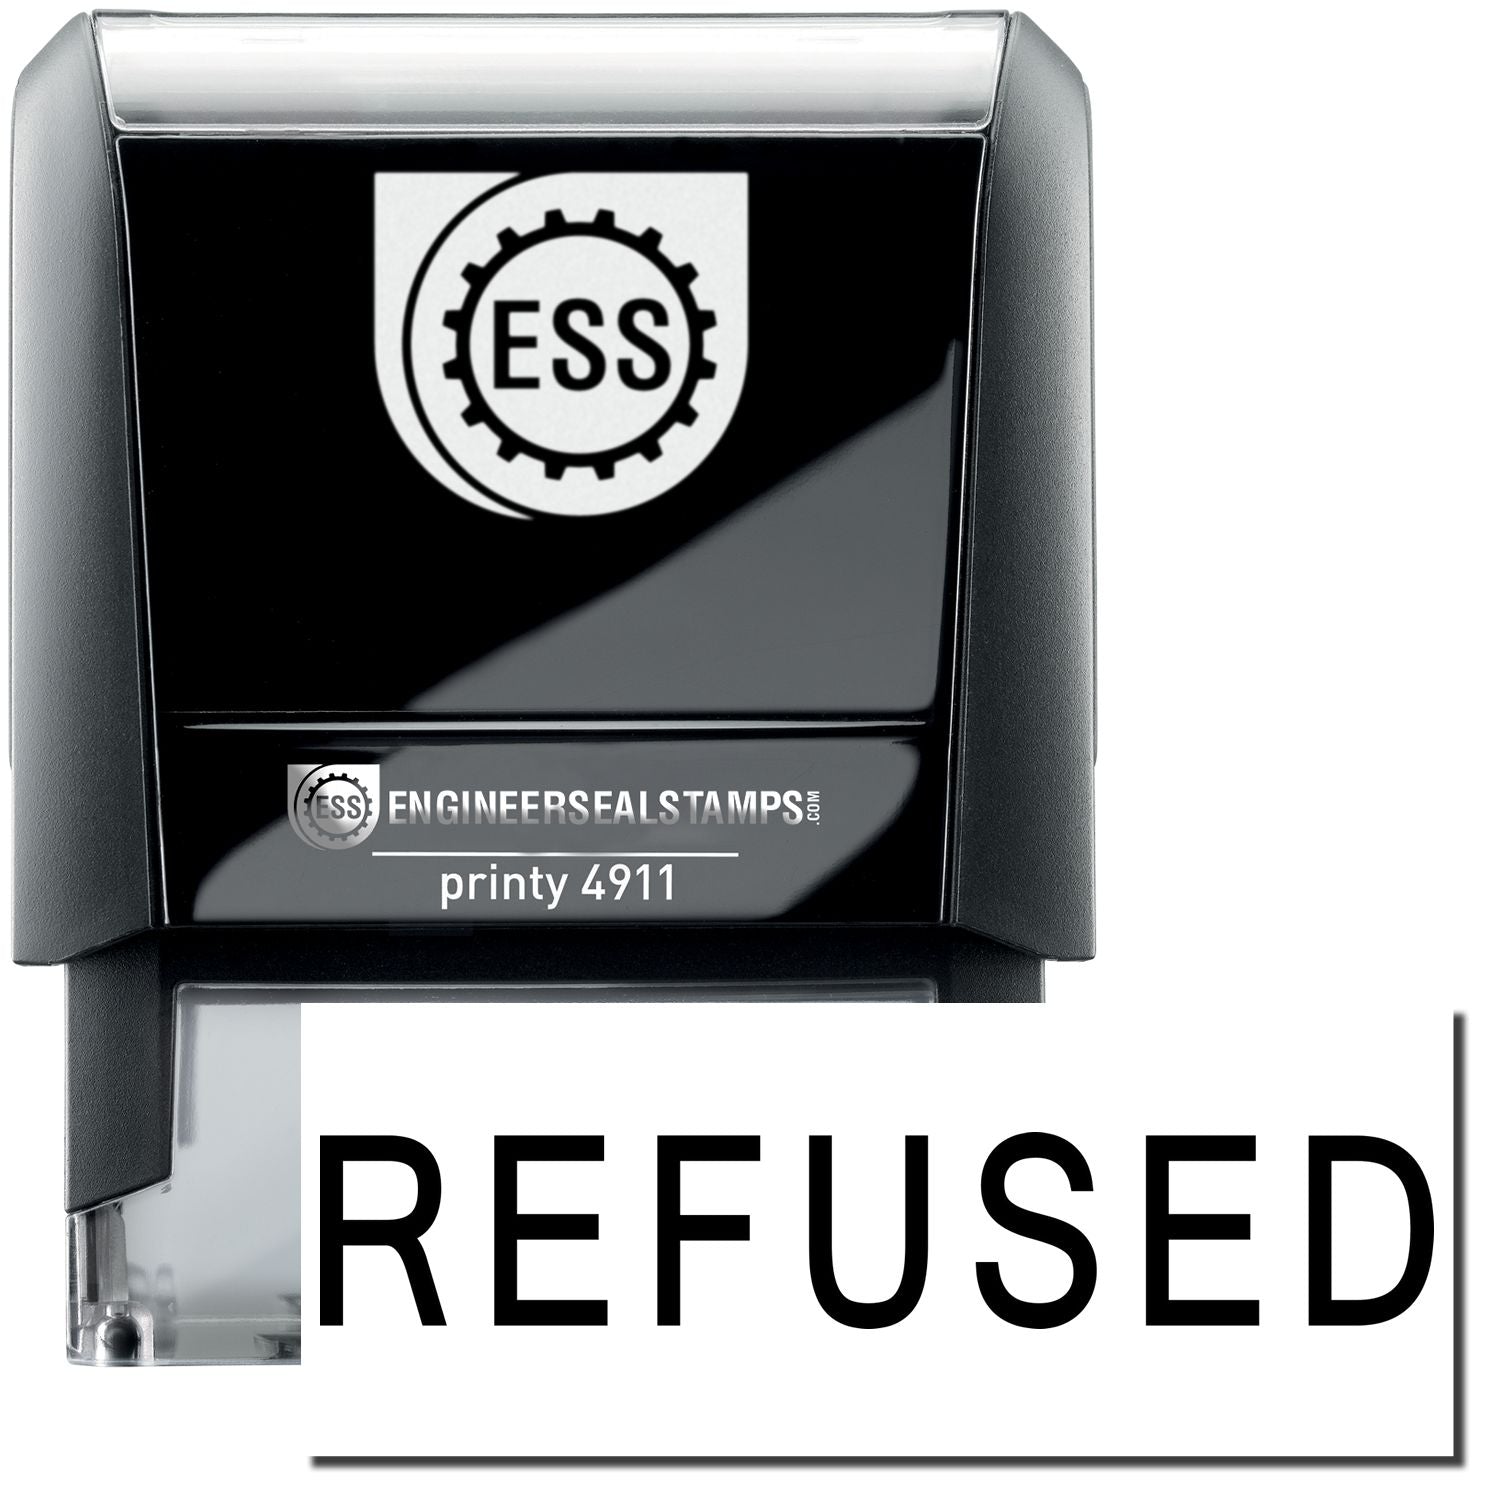 A self-inking stamp with a stamped image showing how the text "REFUSED" is displayed after stamping.